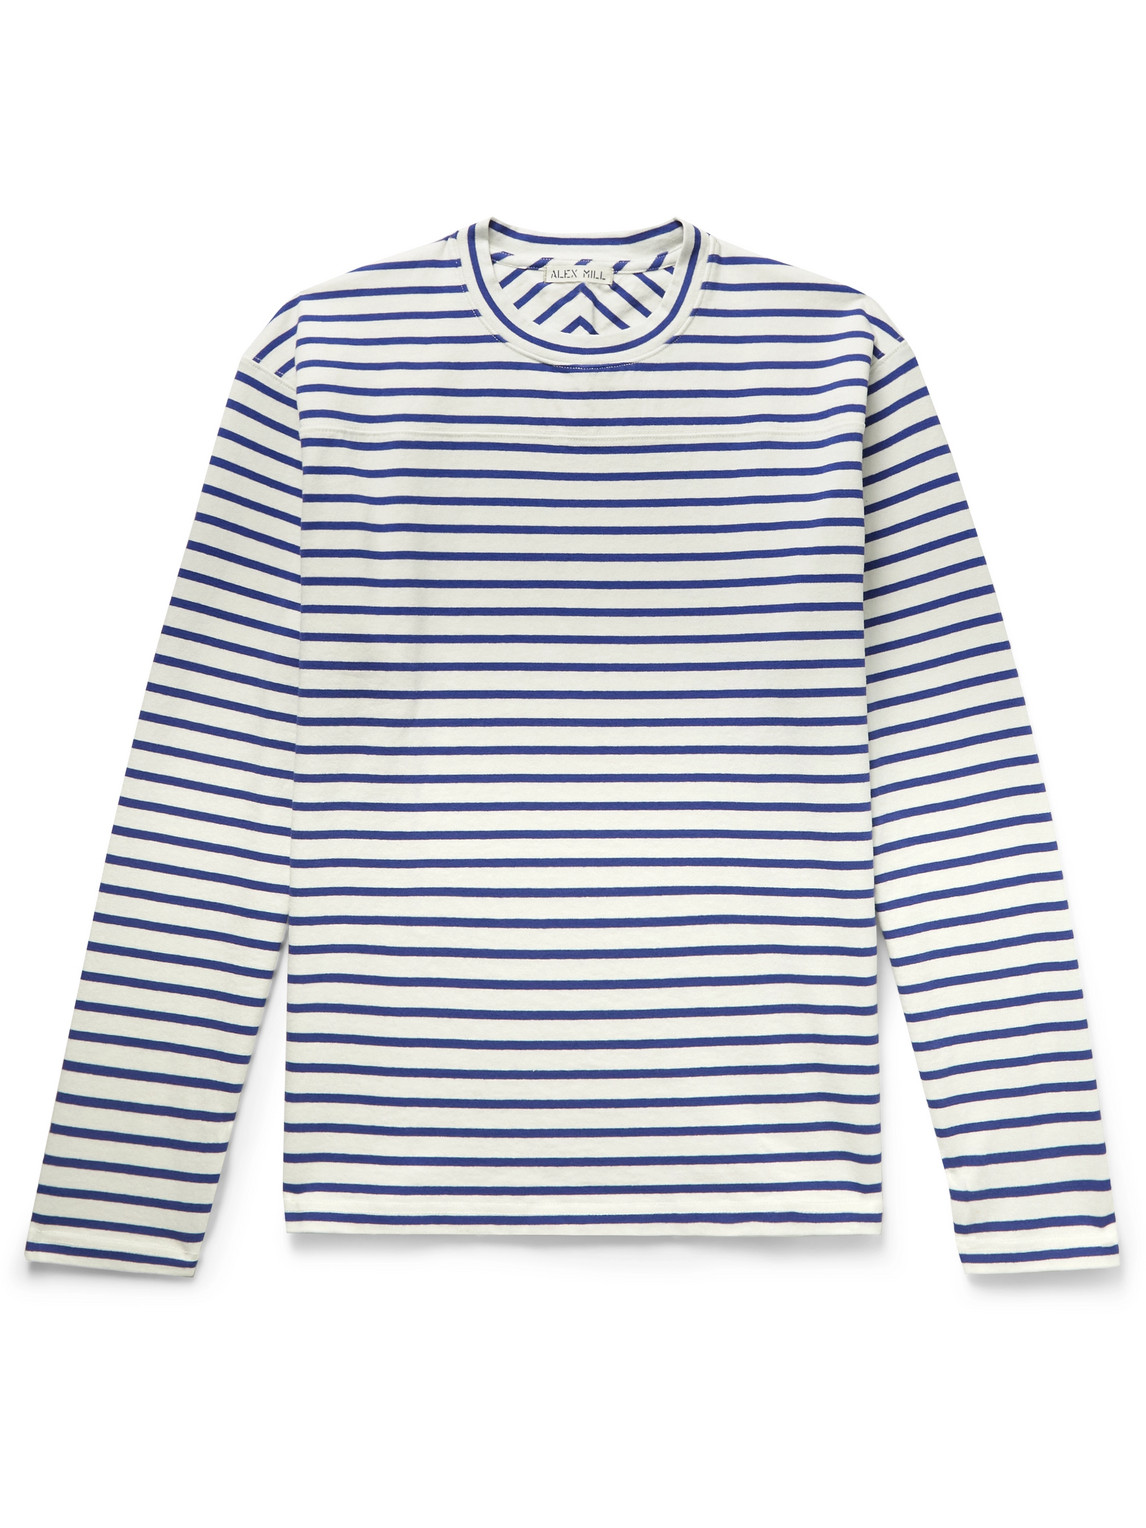 Alex Mill Touch Down Striped Bci Cotton-jersey T-shirt In Blue